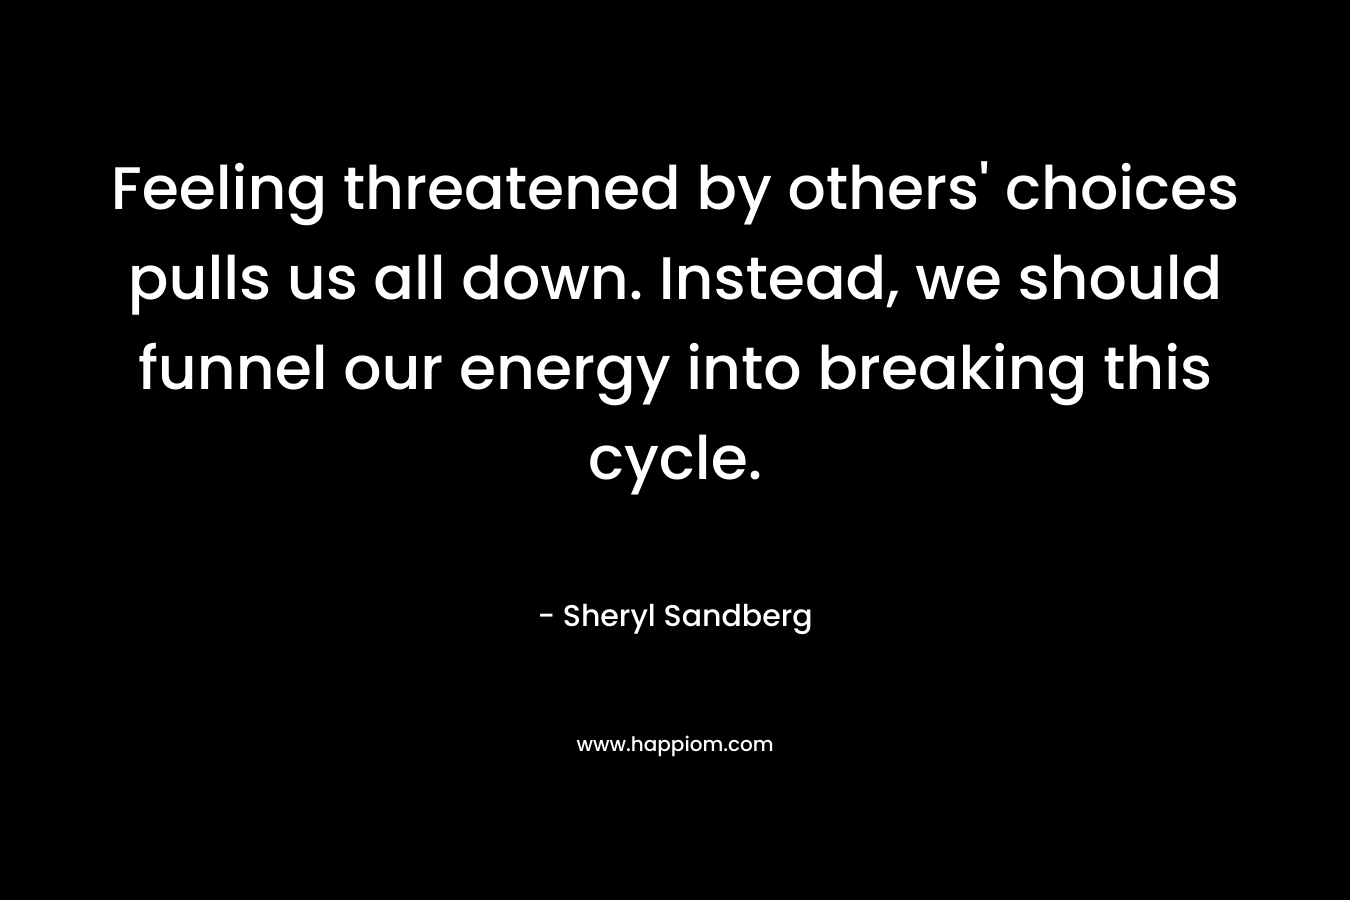 Feeling threatened by others’ choices pulls us all down. Instead, we should funnel our energy into breaking this cycle. – Sheryl Sandberg